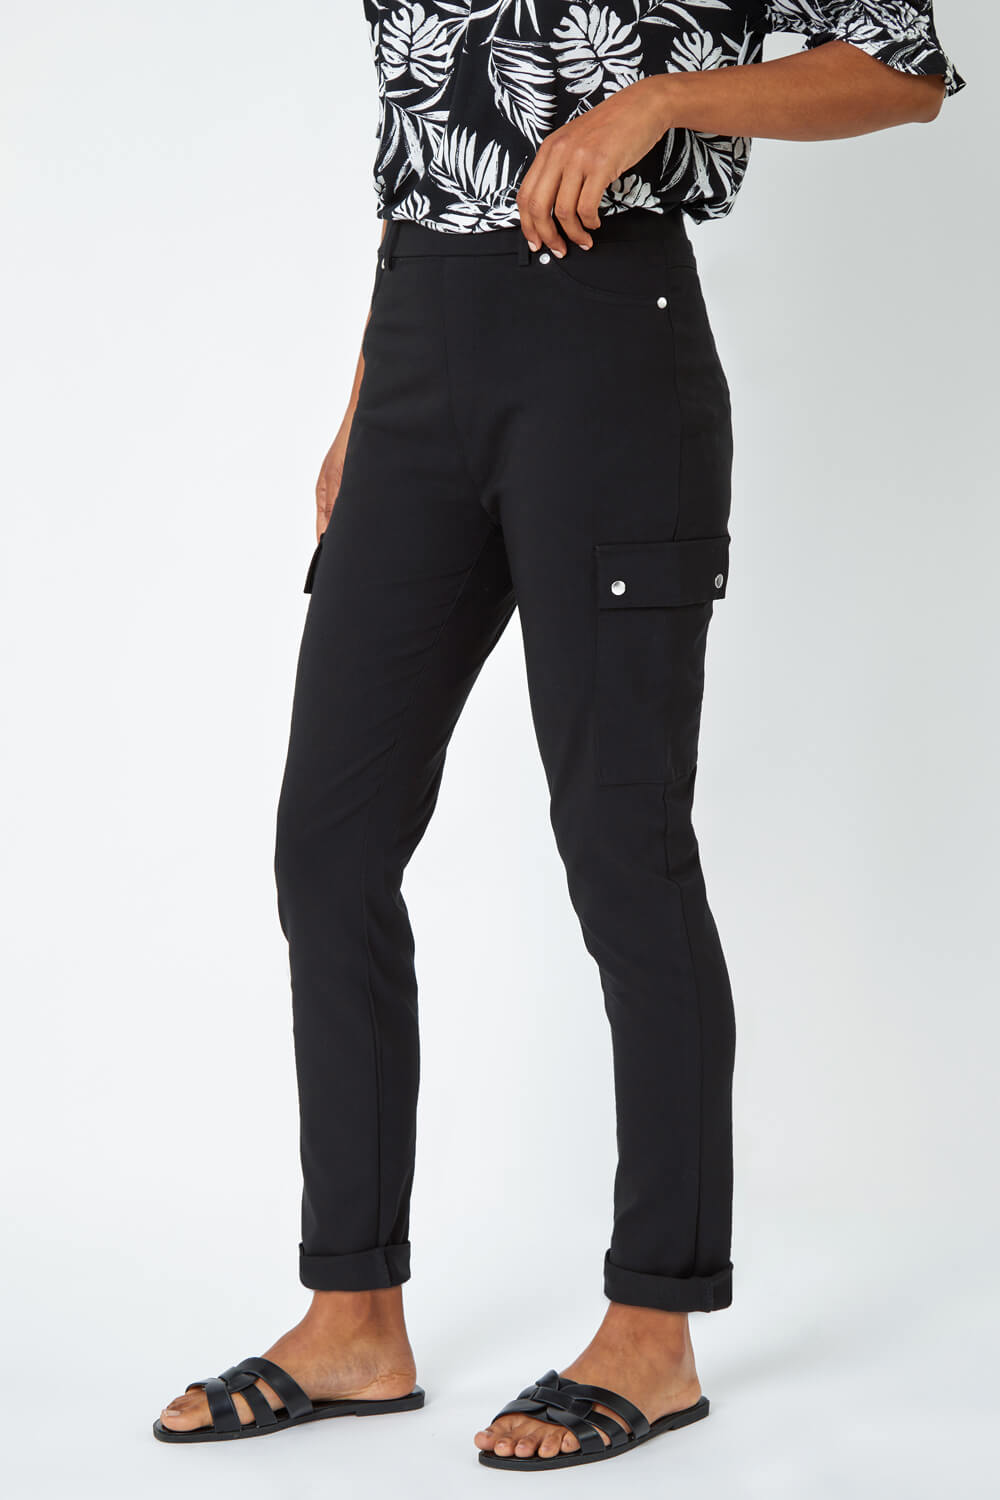 Black Turn Up Stretch Cargo Trousers, Image 5 of 5